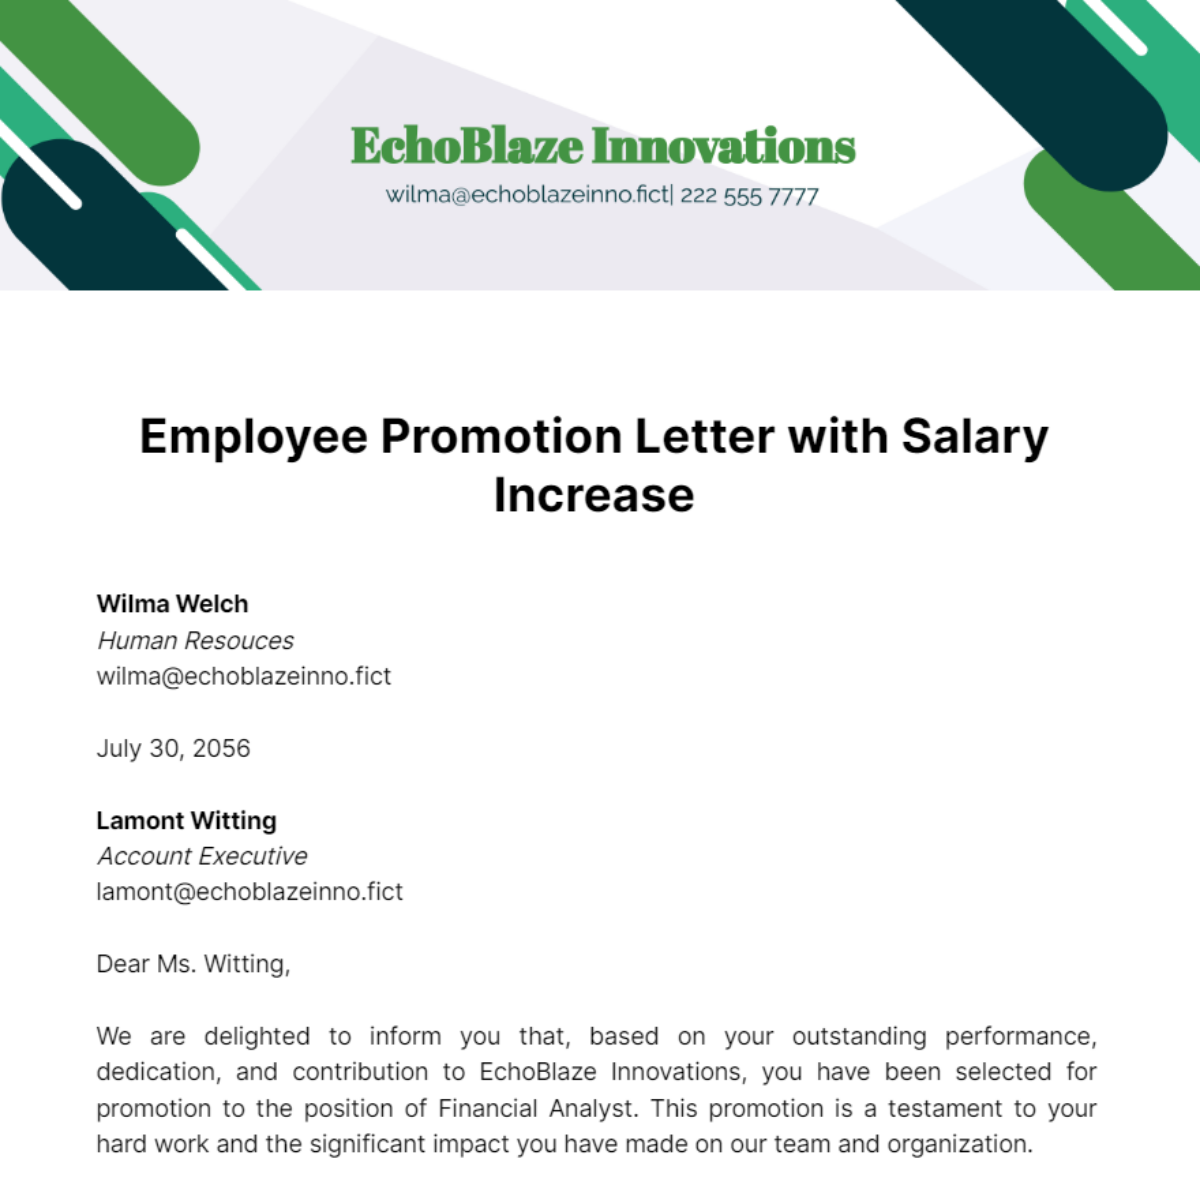 Employee Promotion Letter with Salary Increase Template